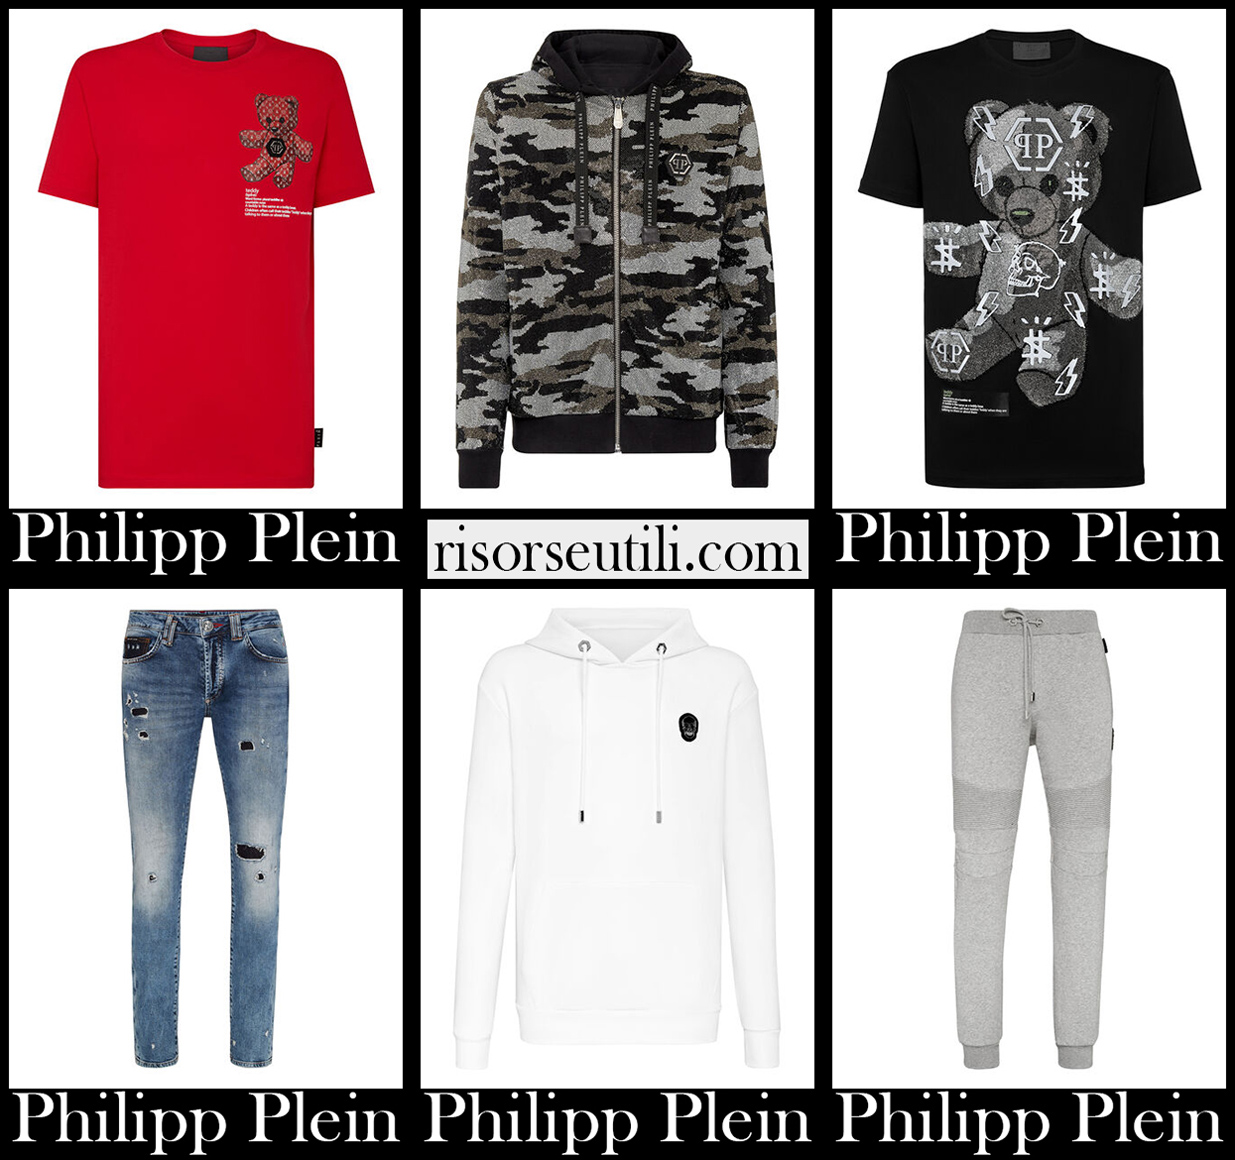 New arrivals Philipp Plein 2021 mens clothing collection